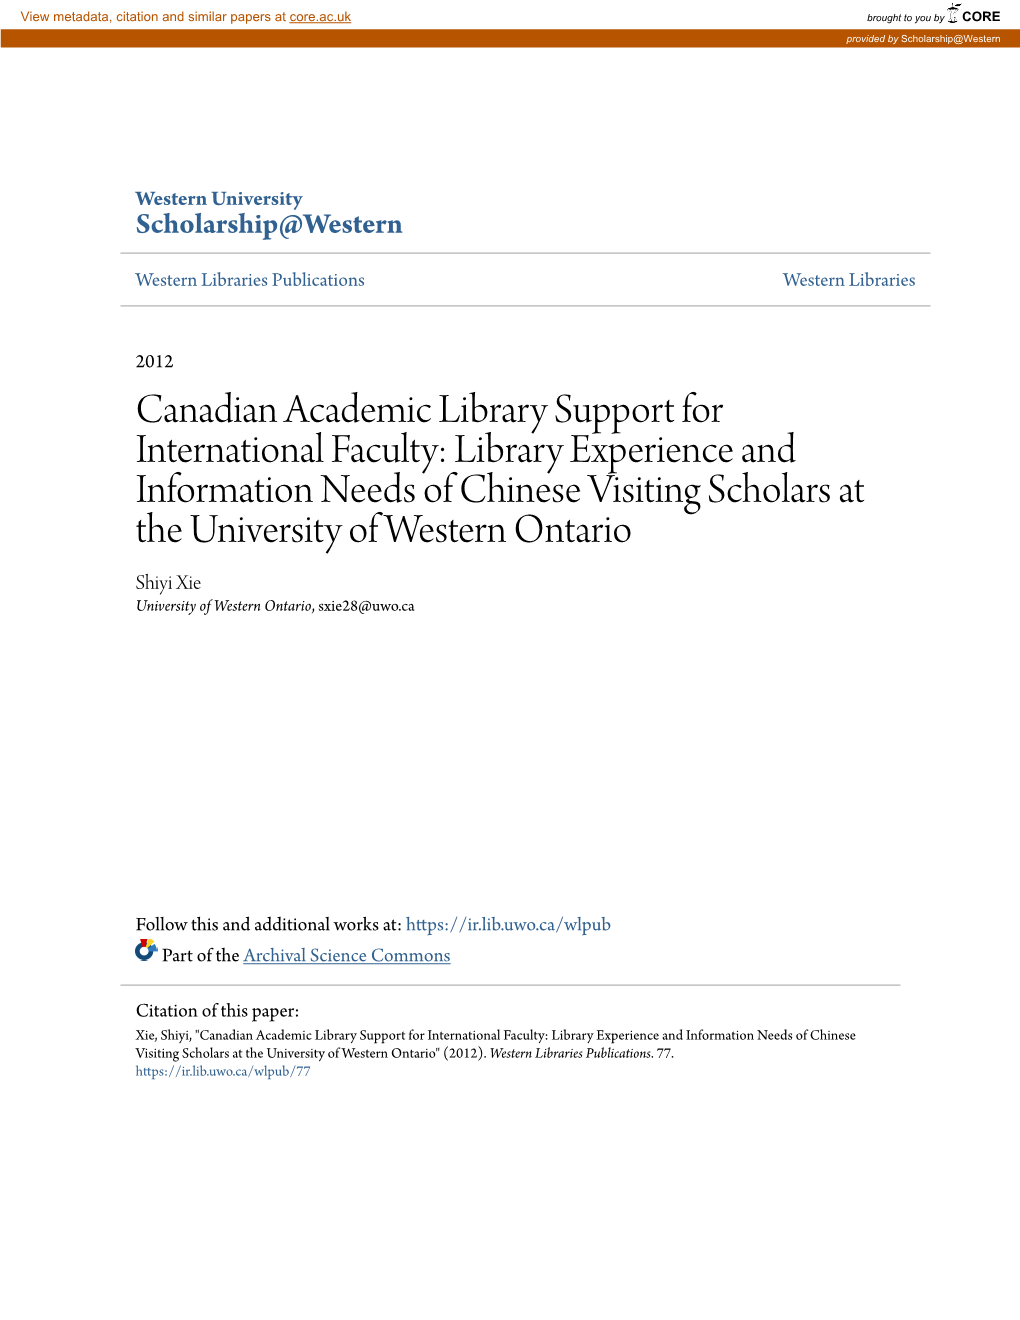 Canadian Academic Library Support for International Faculty